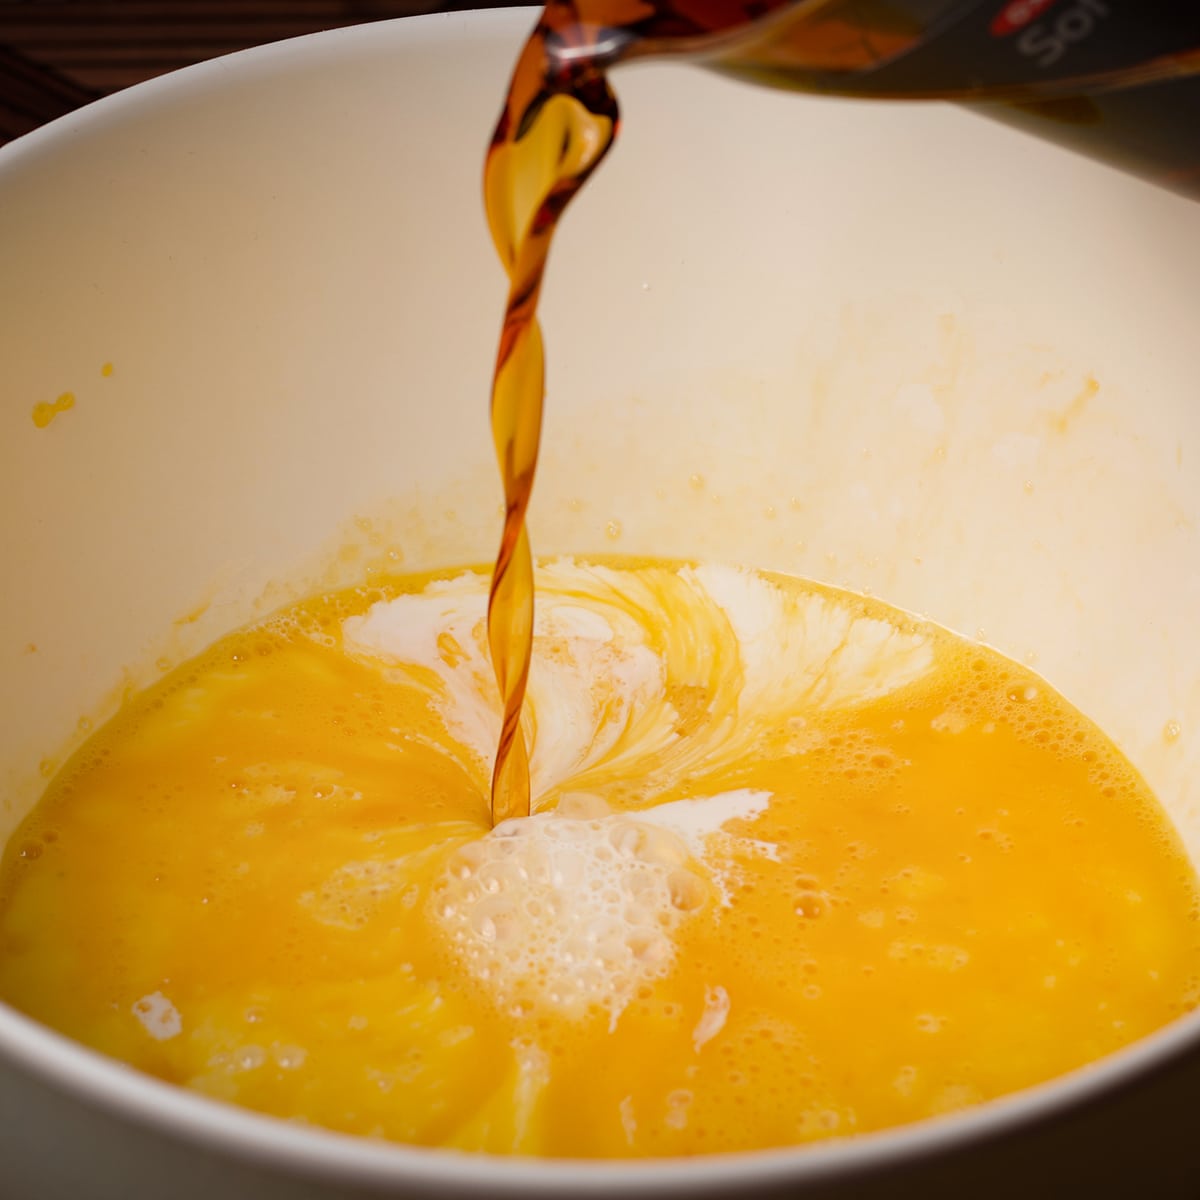 Someone pouring maple syrup and cream into a bowl that contains beaten eggs.